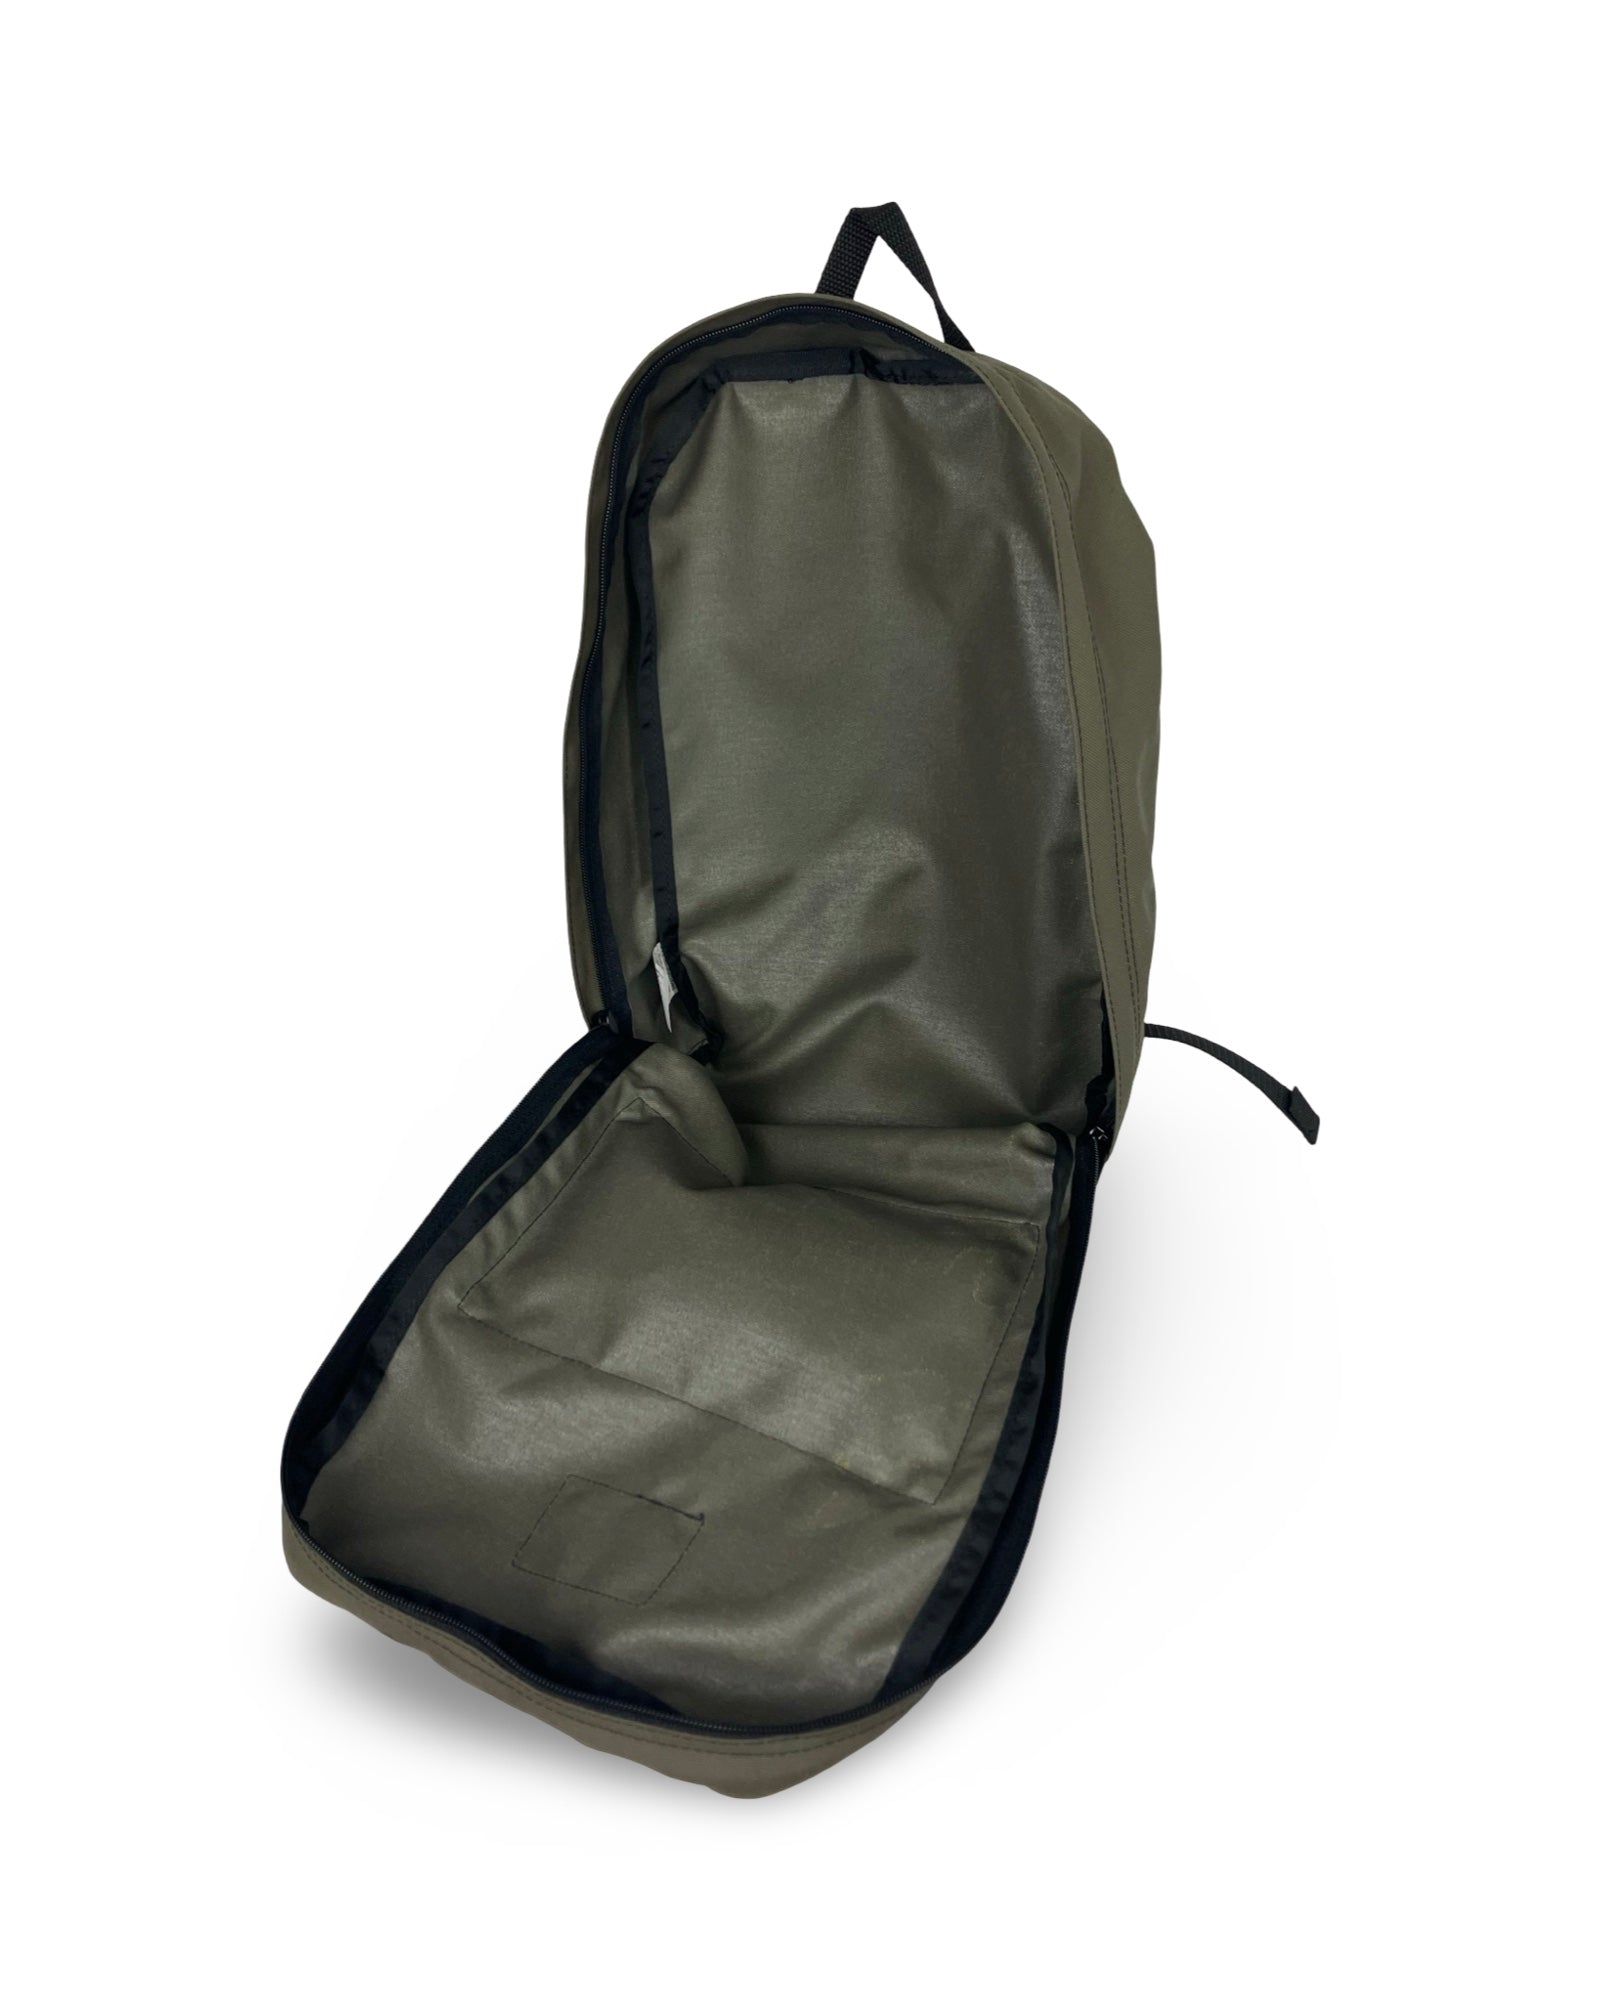 OTHELLO Children's Backpacks, by Tough Traveler. Made in USA since 1970